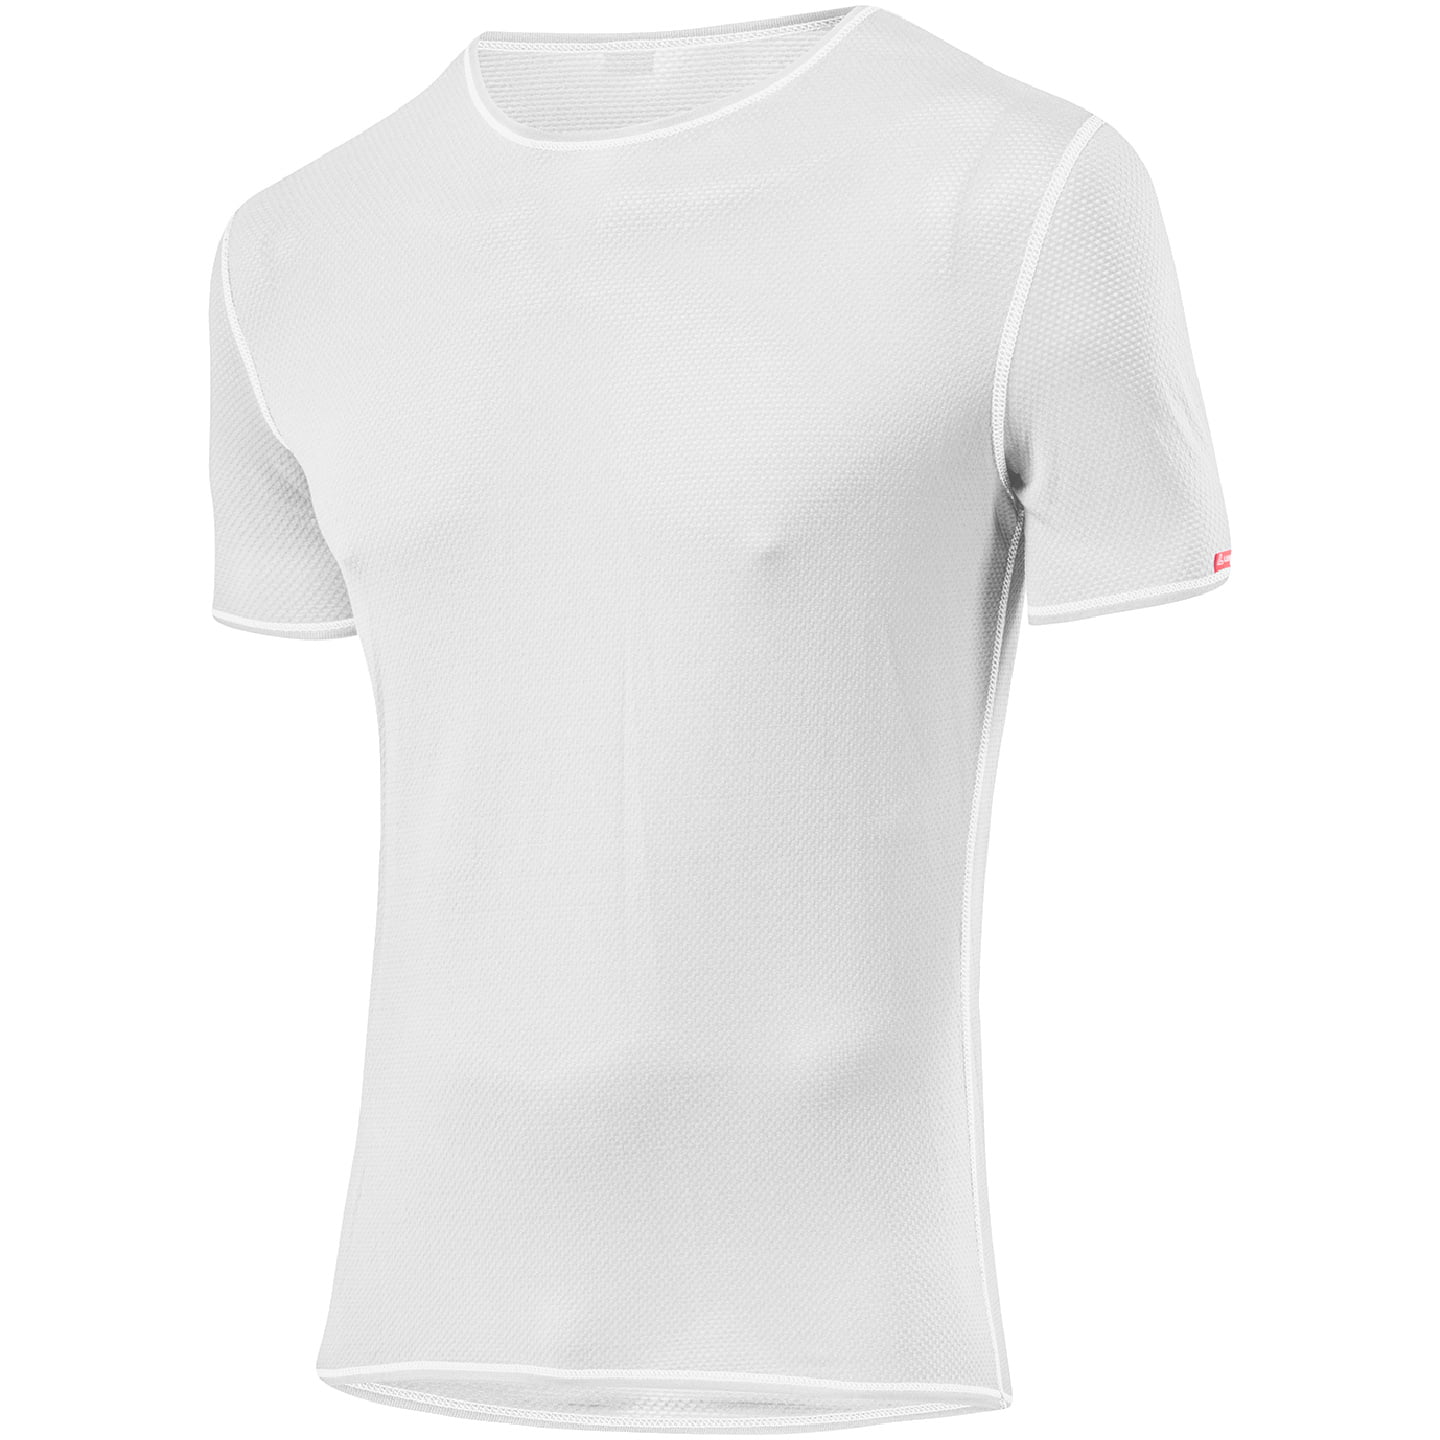 TransTex Light Cycling Base Layer Base Layer, for men, size 2XL